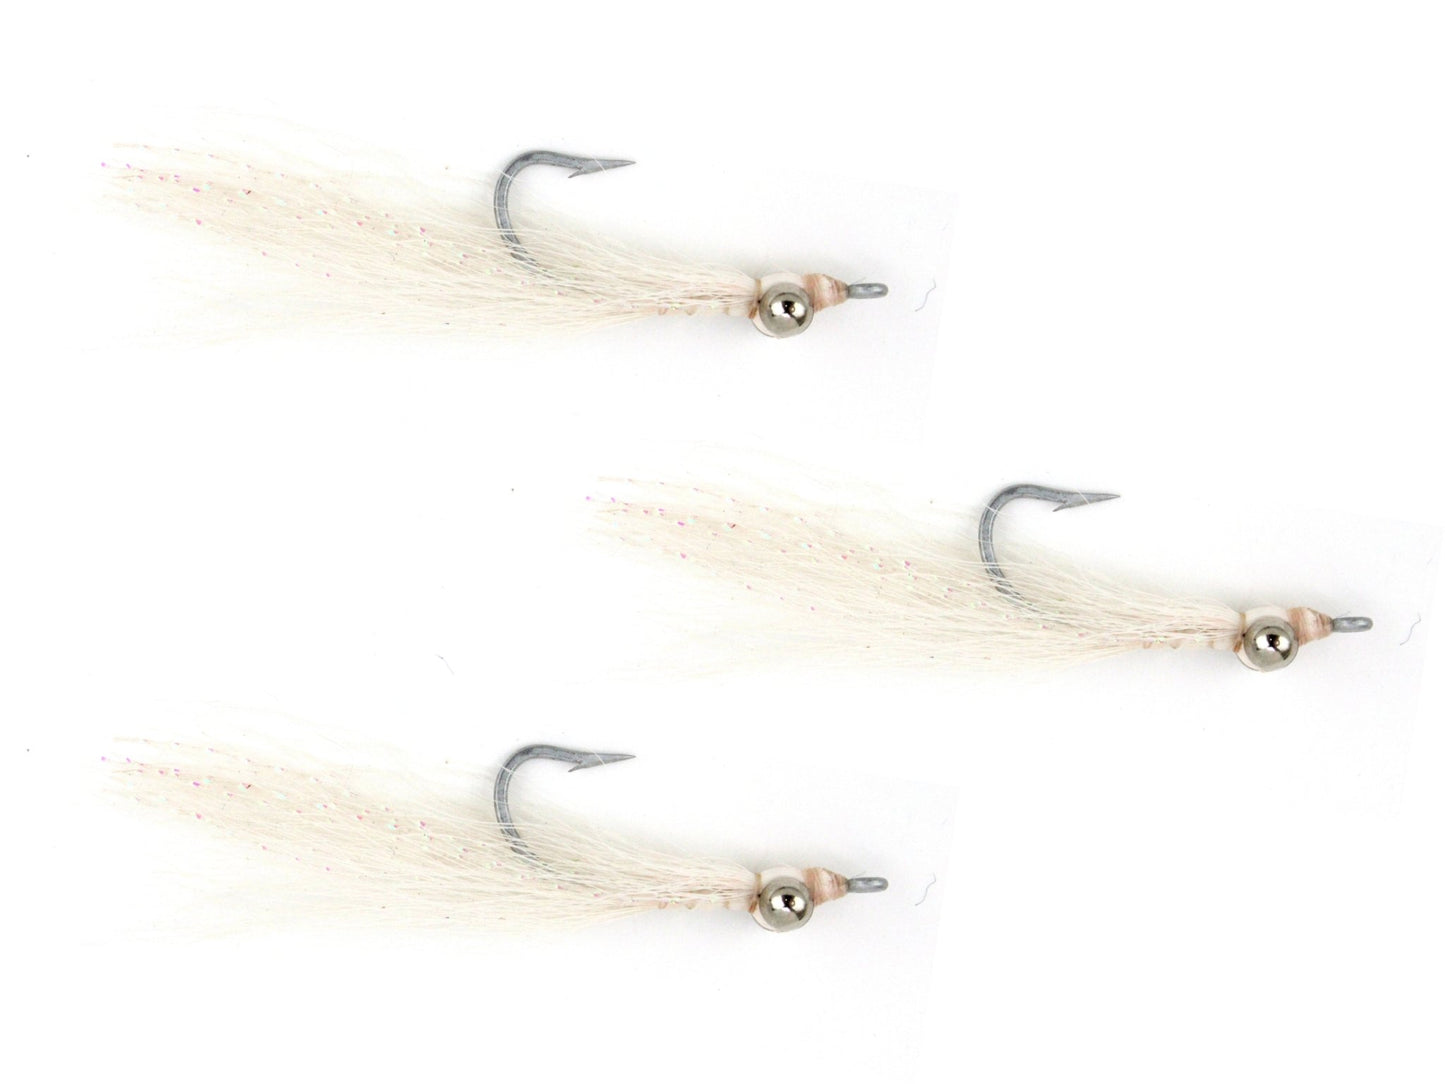 Wild Water Fly Fishing White Sea Trout Heavy Clouser Deep Diving Minnow, Size 2, Qty. 3 - Angler's Pro Tackle & Outdoors